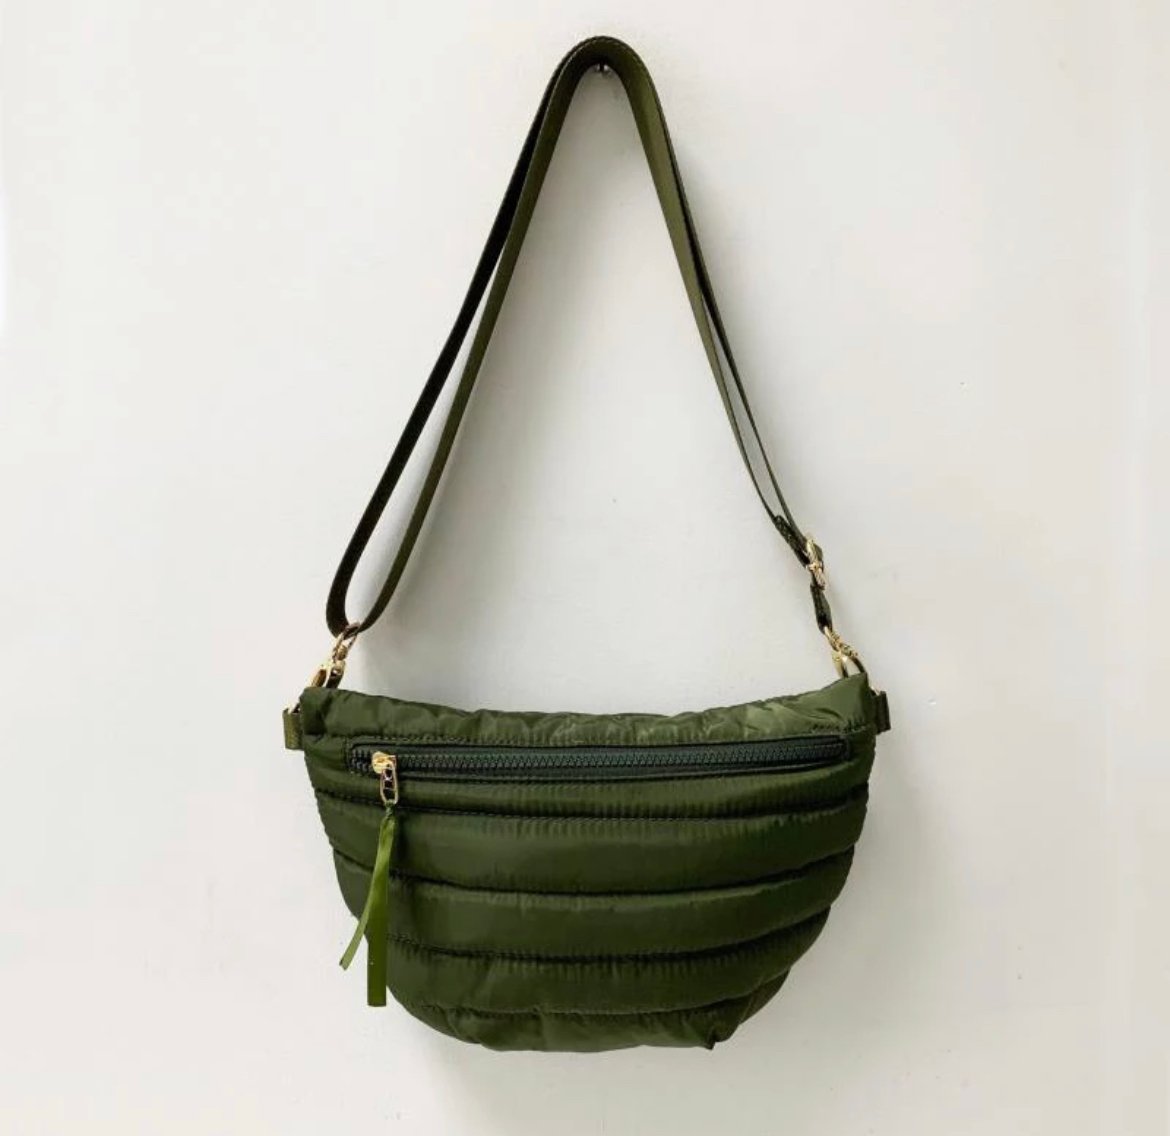 Image of Fanny Crossbody - 6 options (plain nude not available)